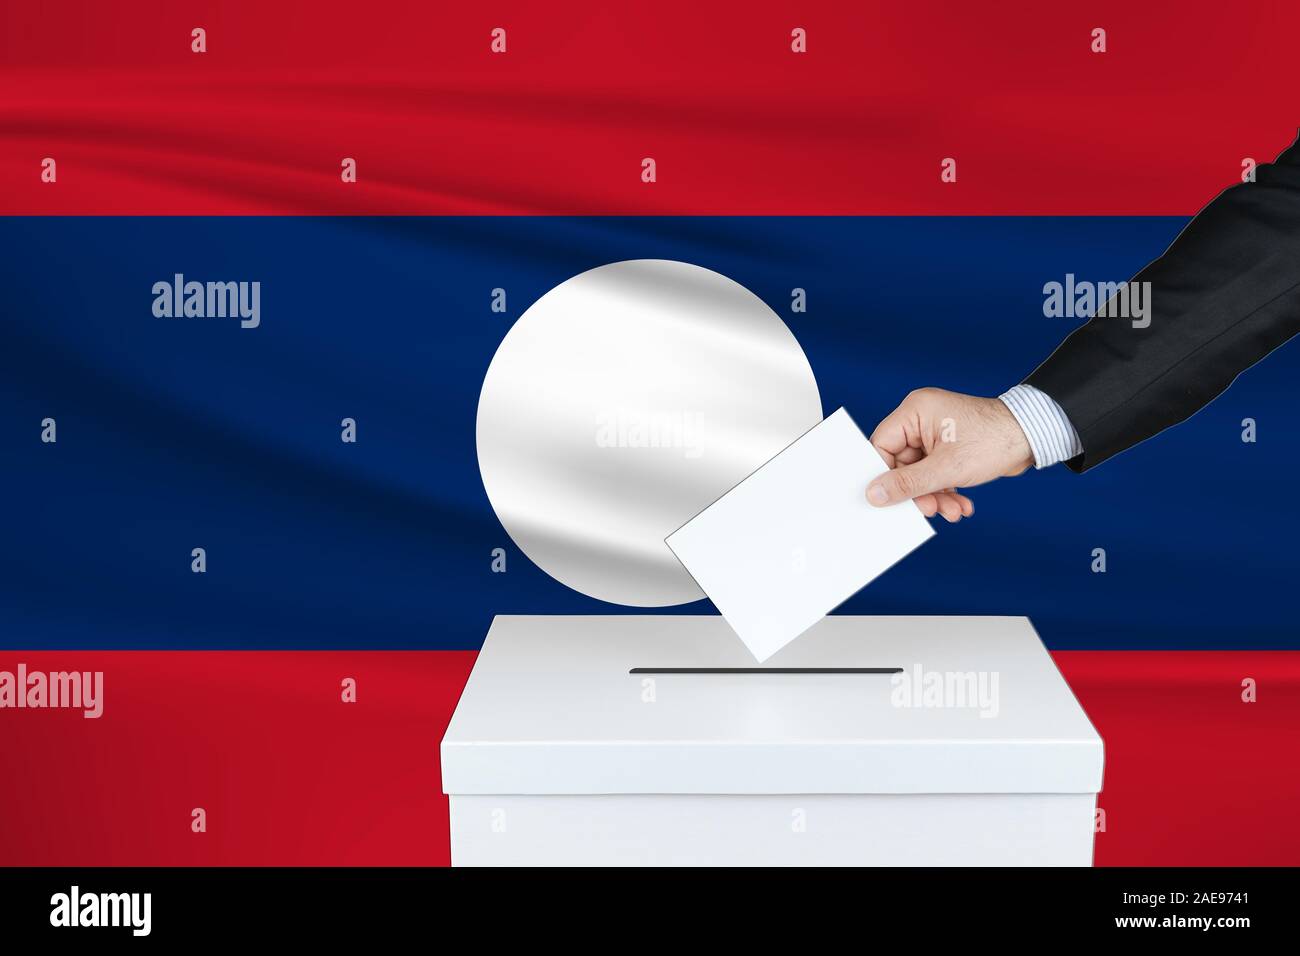 Election in Laos. The hand of man putting his vote in the ballot box. Waved Laos flag on background. Stock Photo